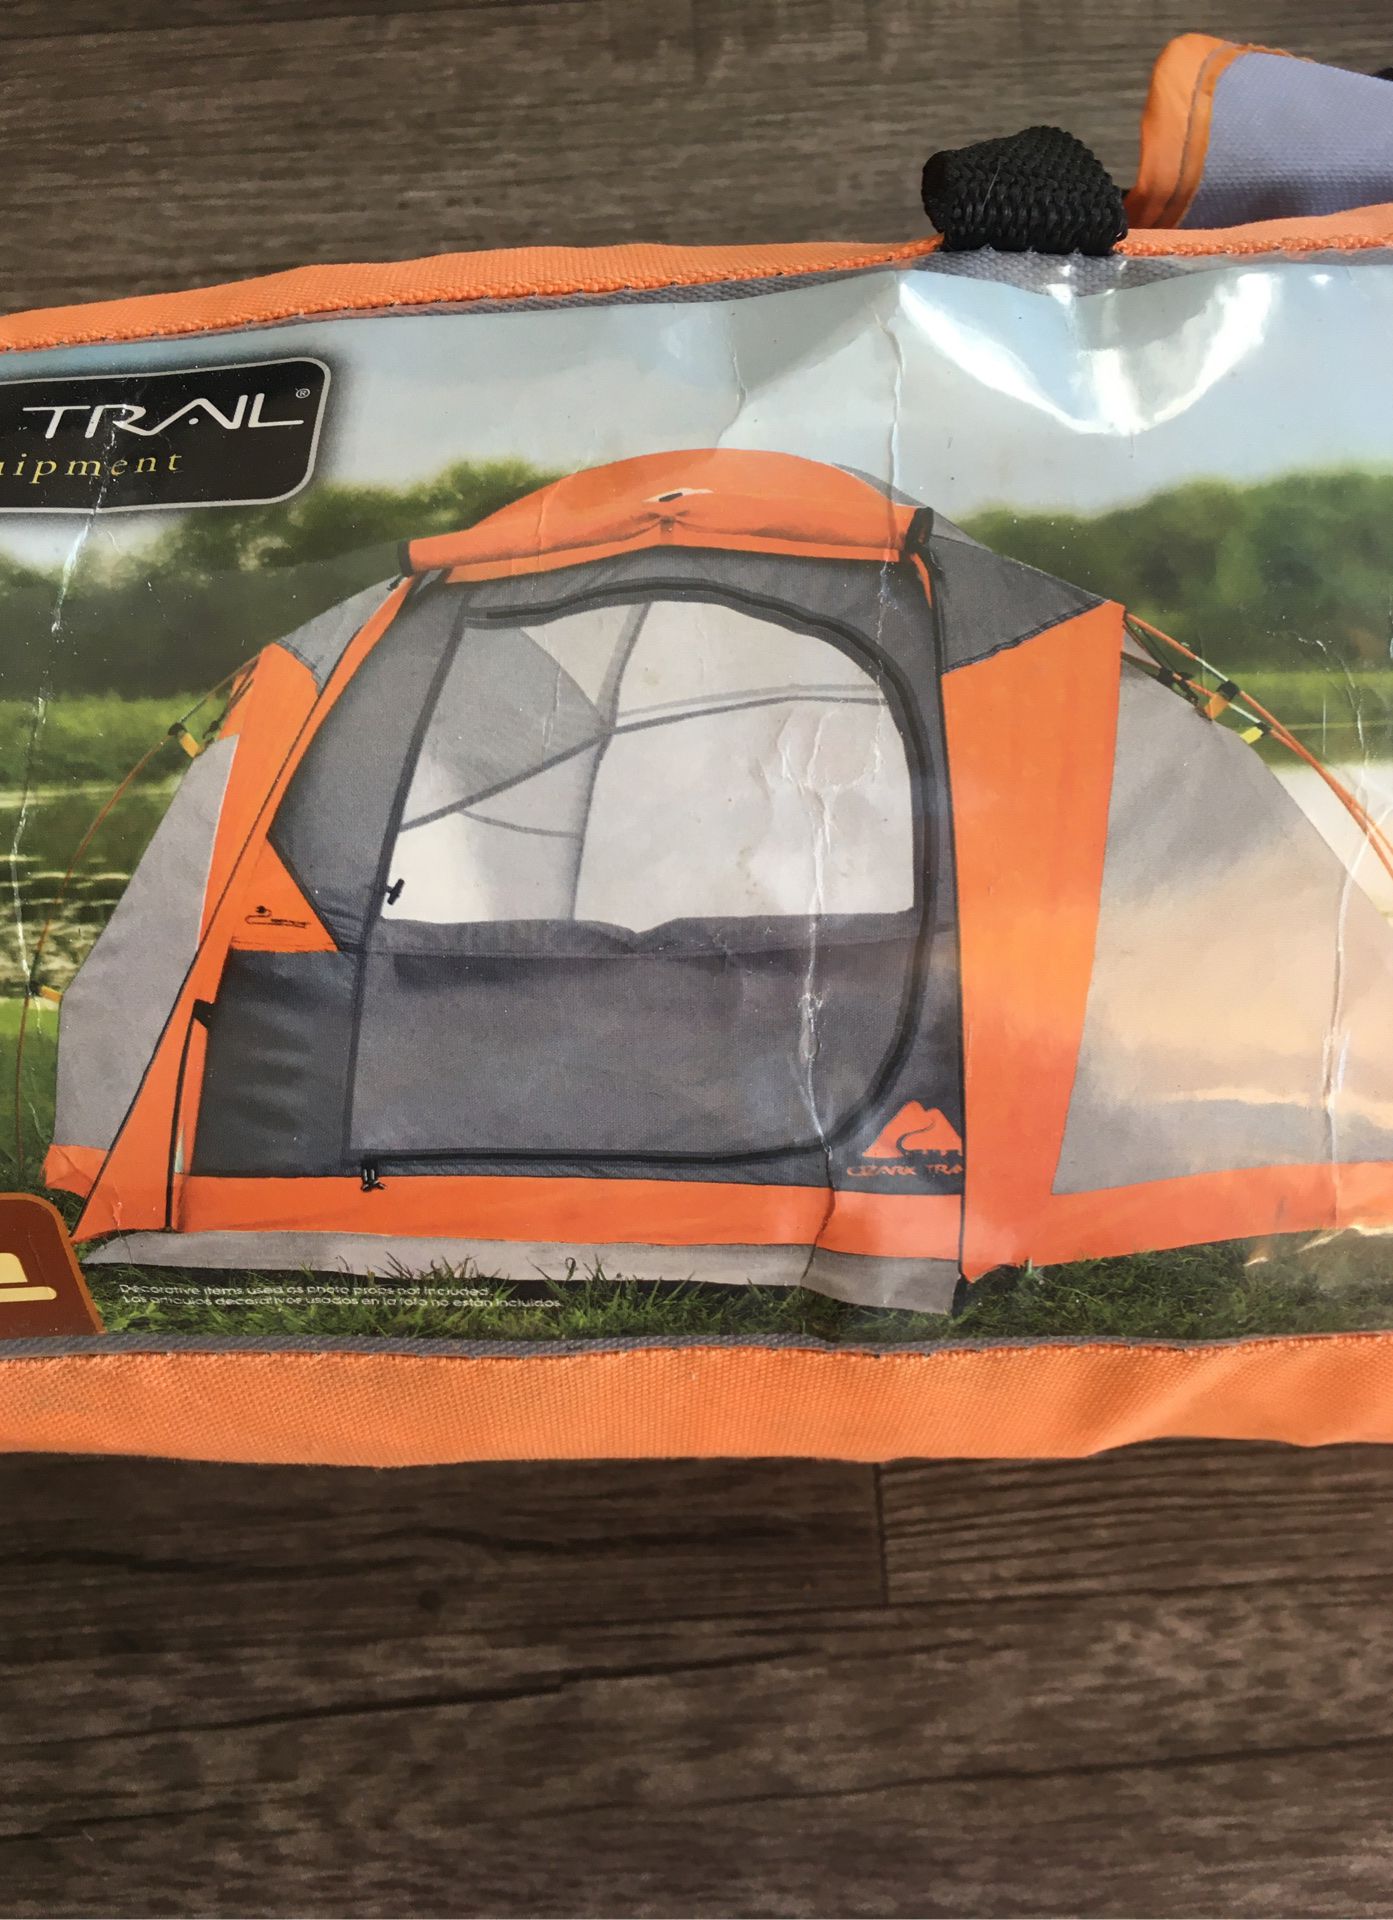 Tent backpacking camping 3p